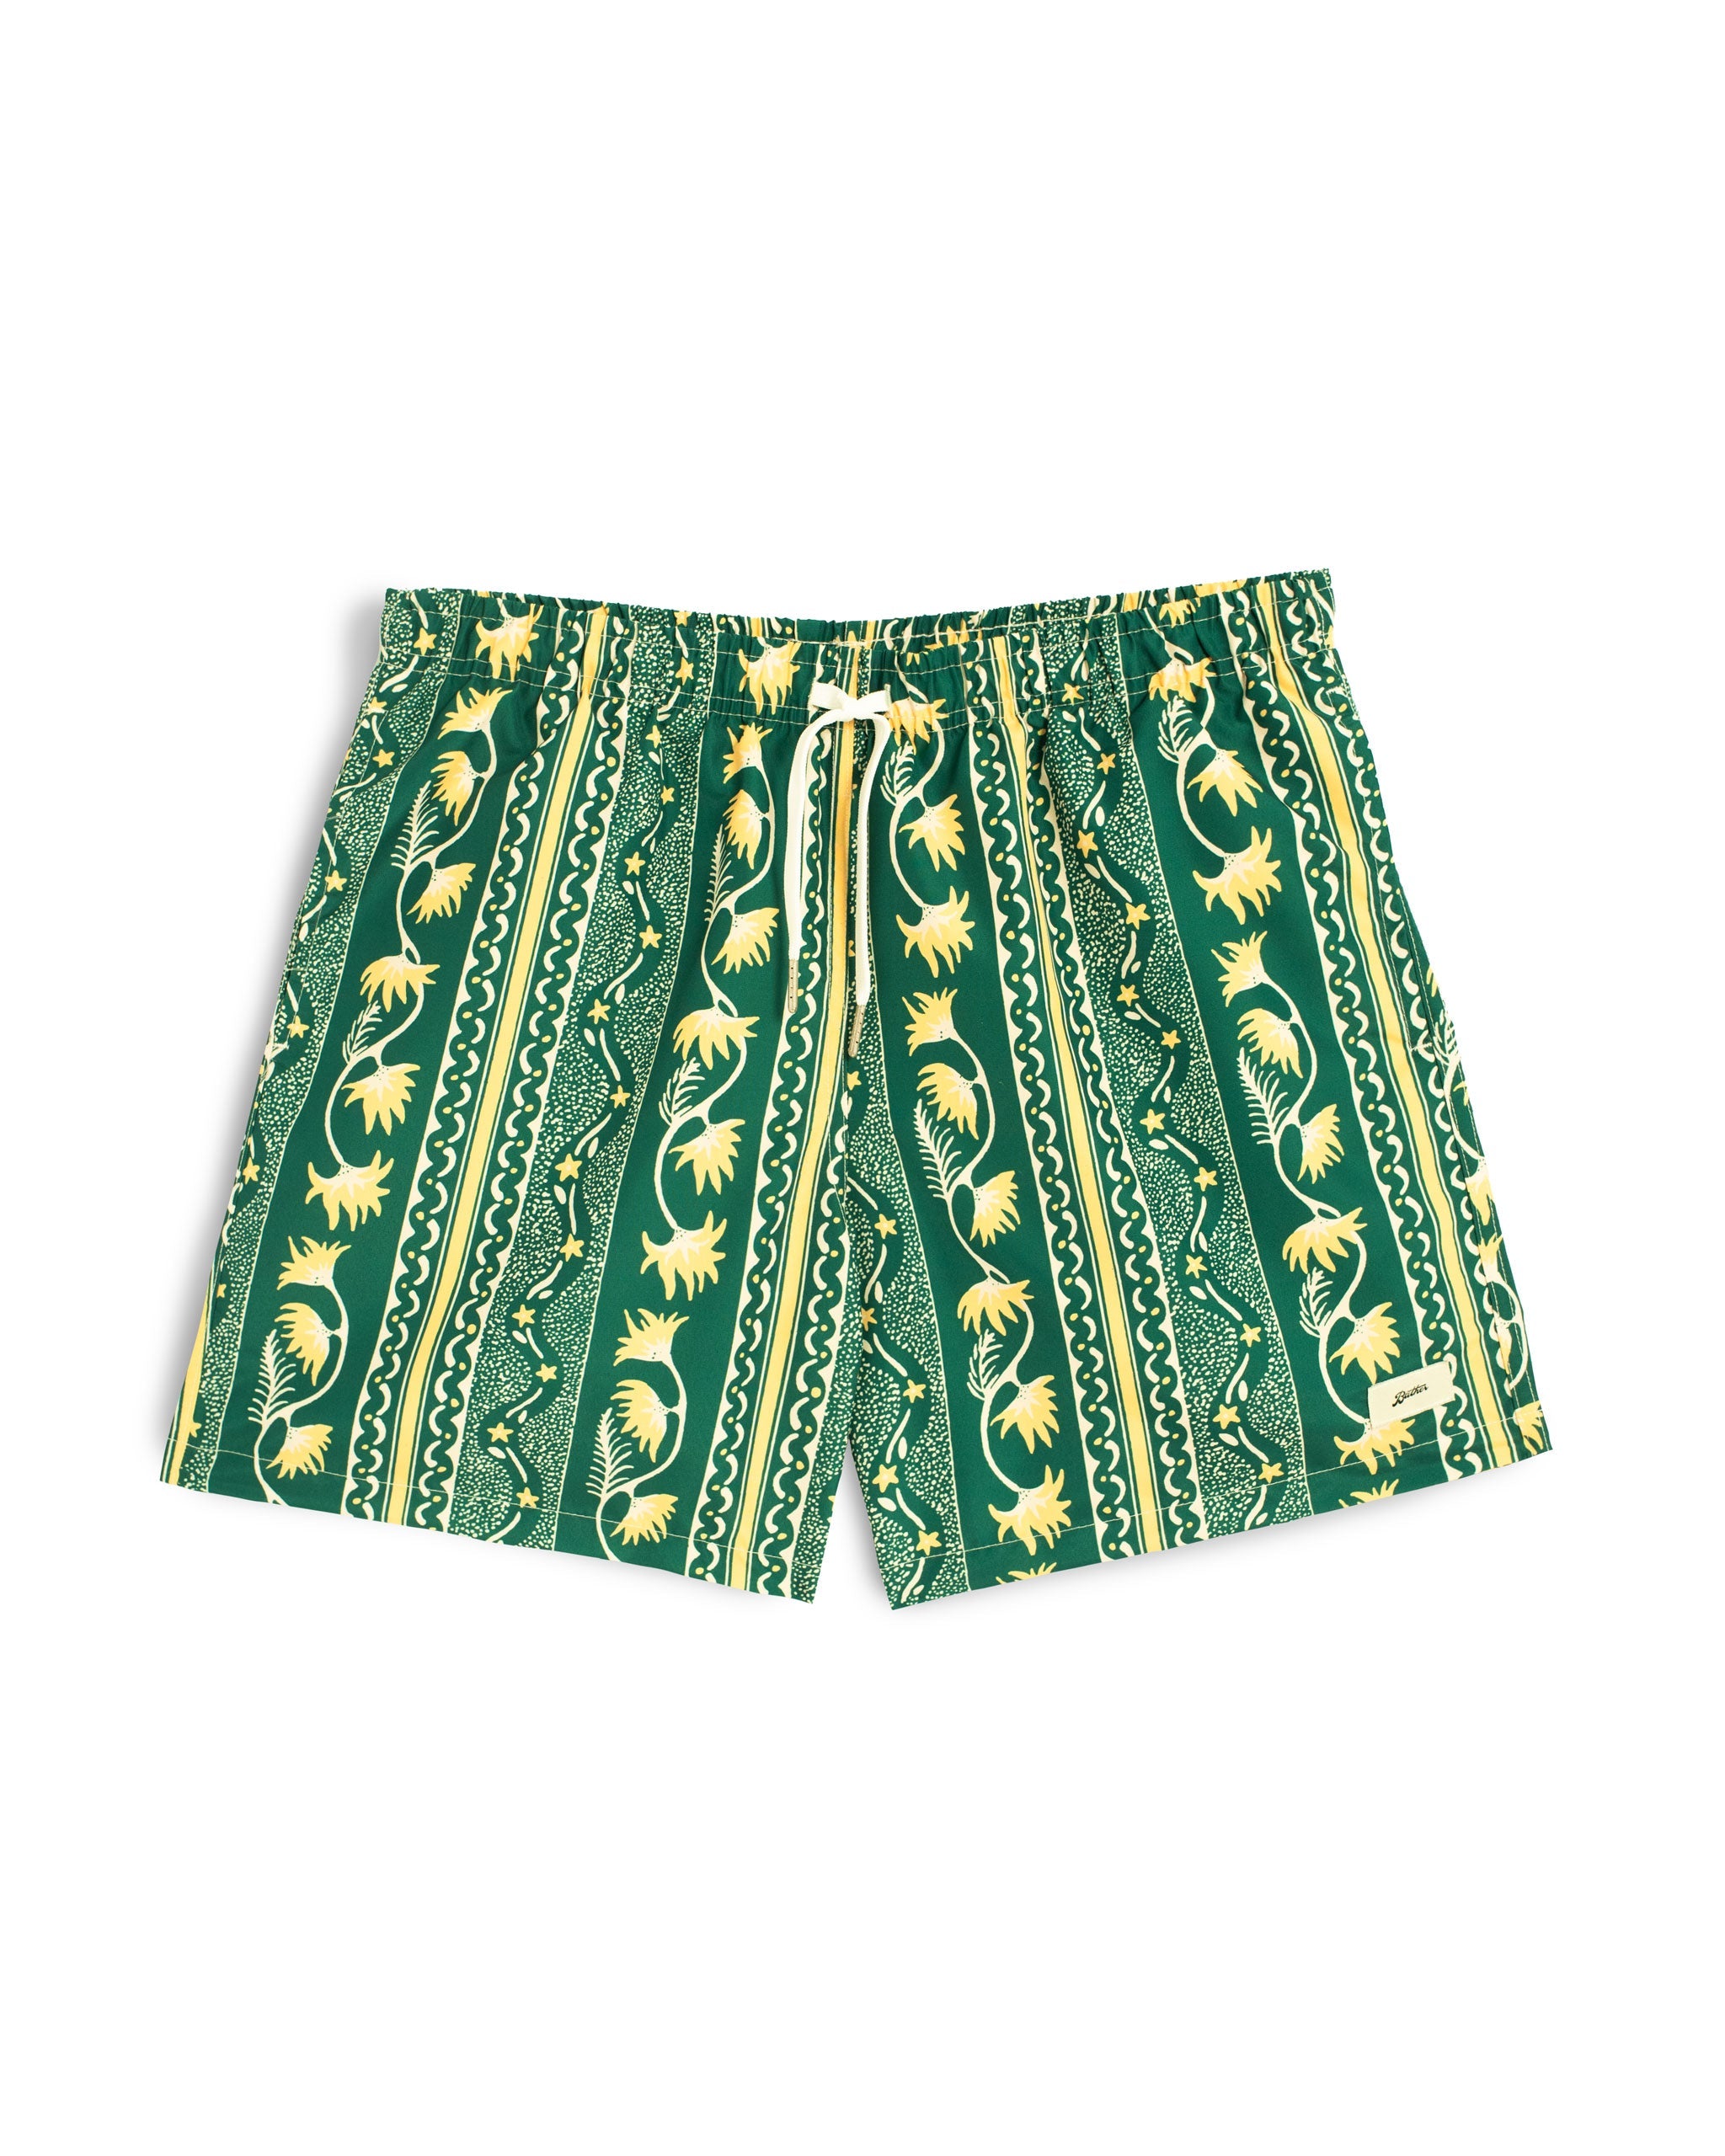 Green swim trunk with yellow and white classic stripe with flowers, sand, and starfish